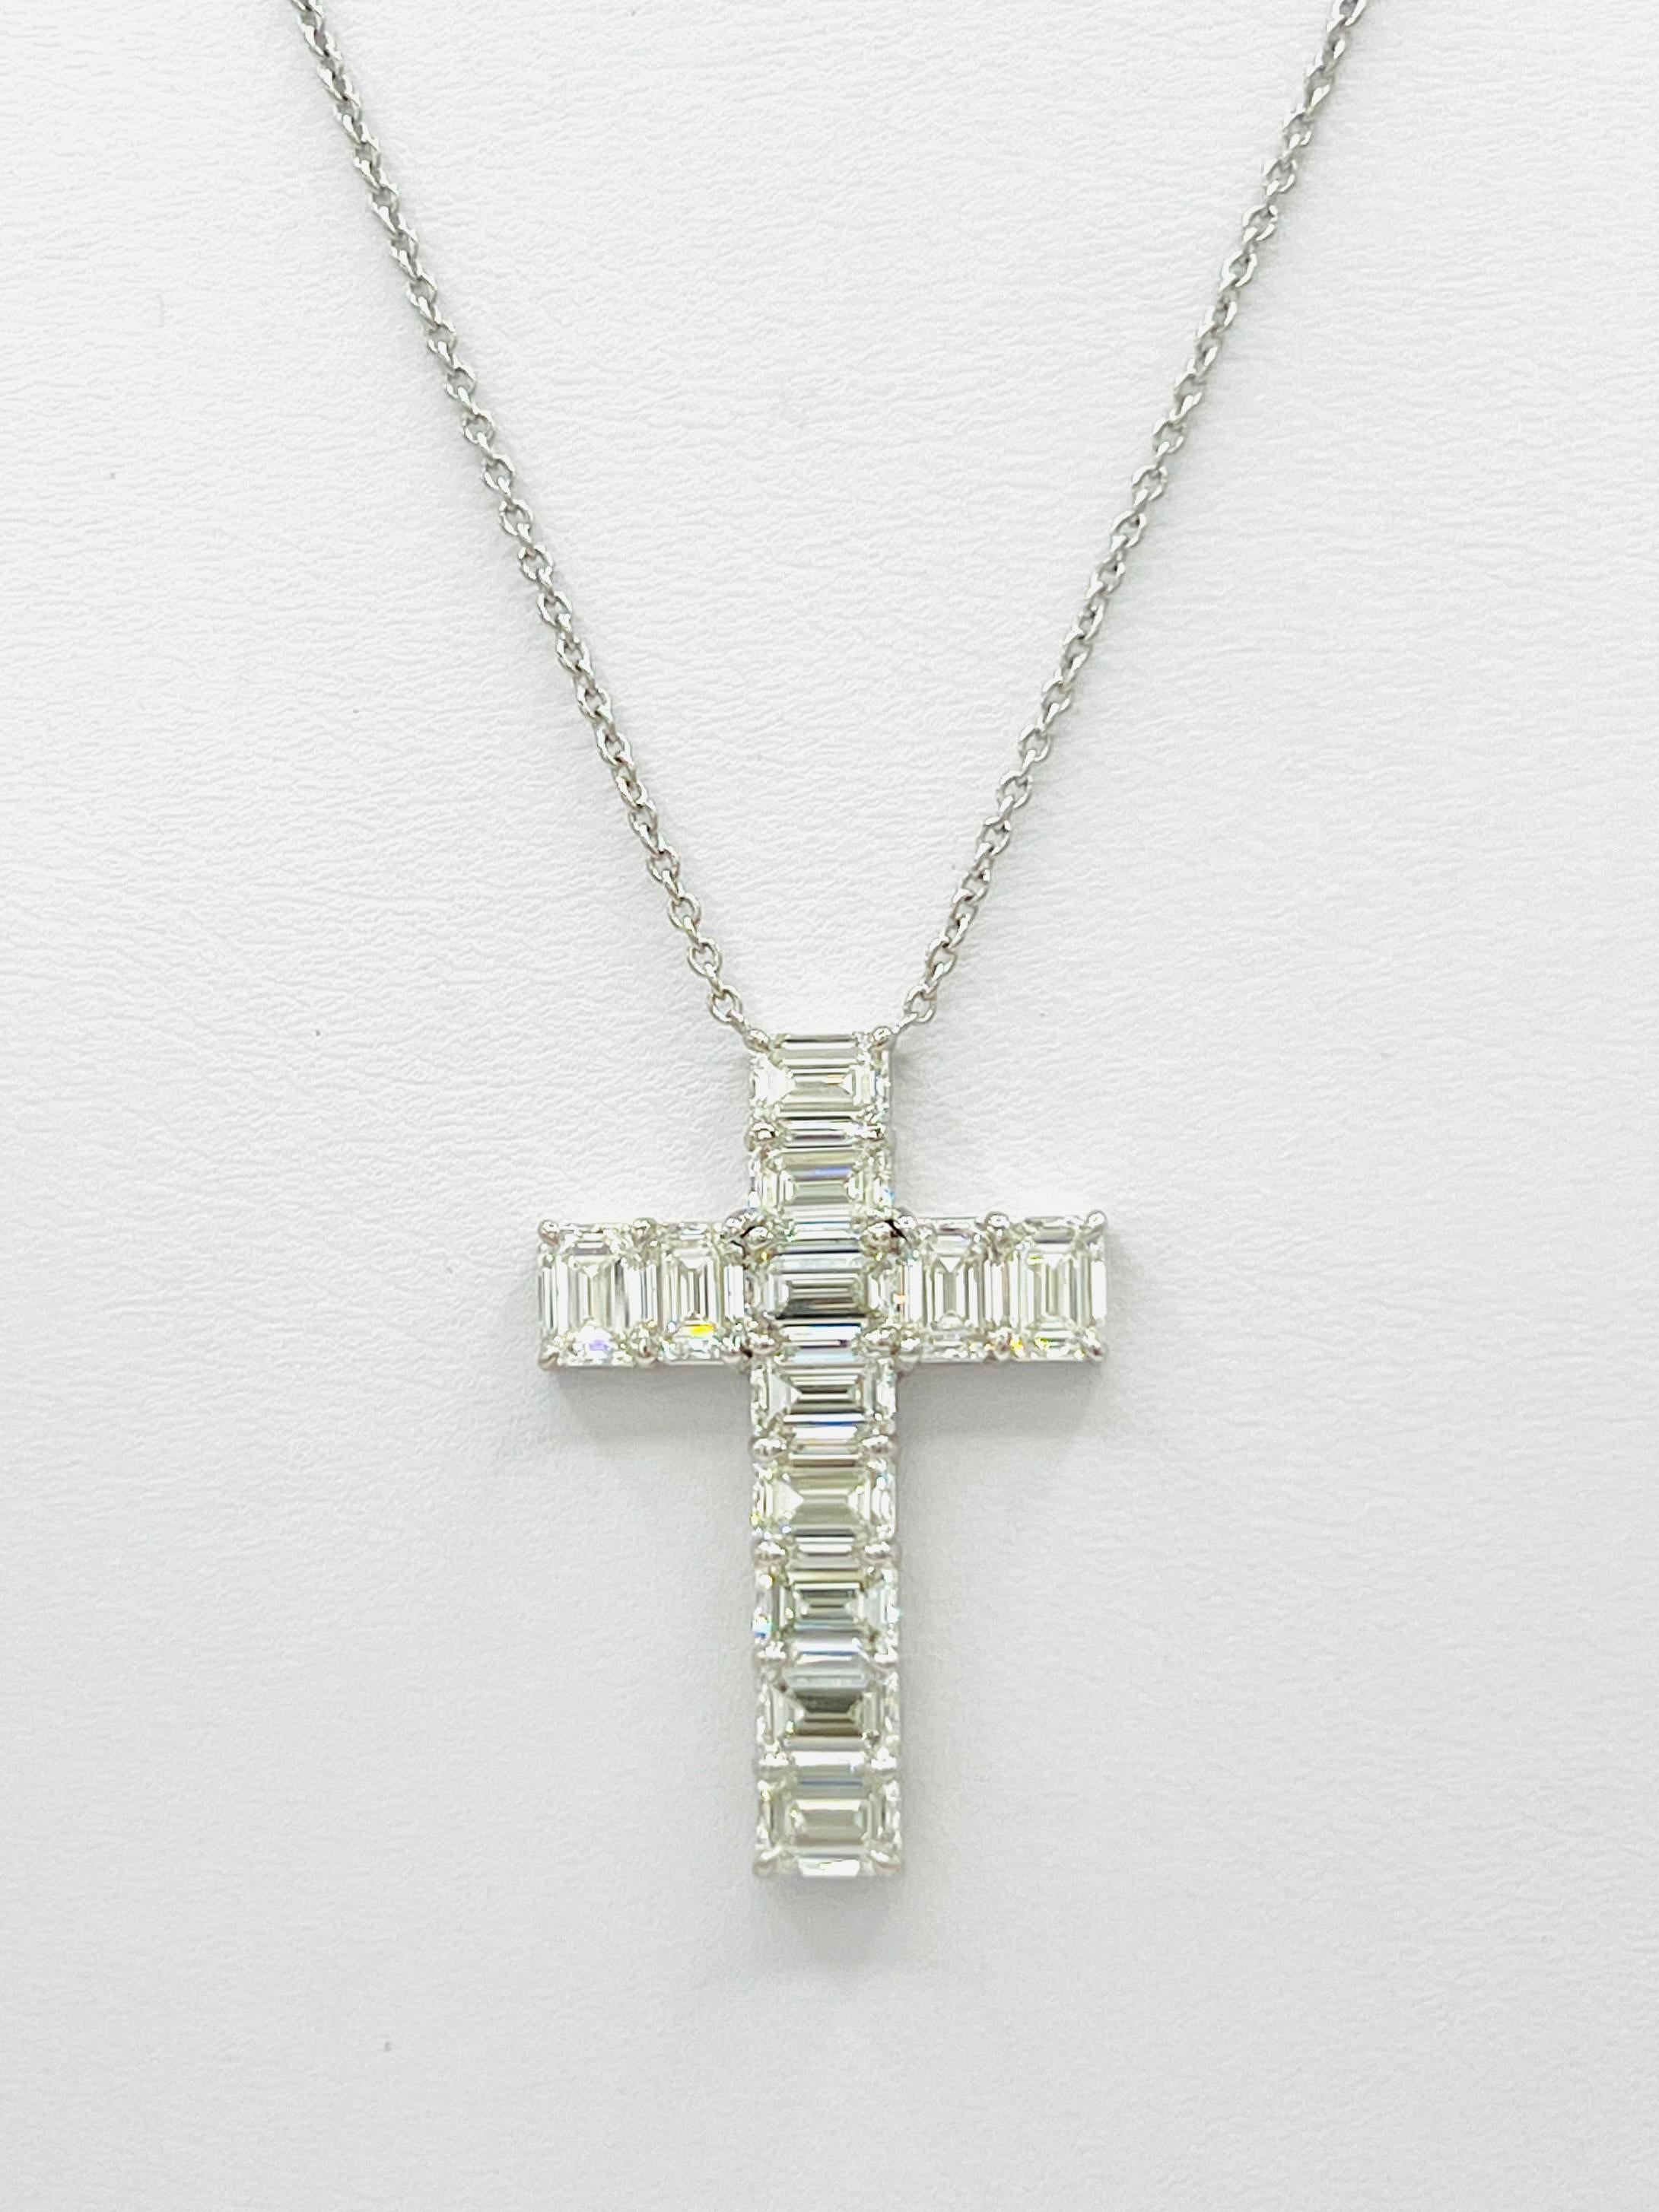 GIA Emerald Cut White Diamond 0.50 ct. Each Cross Pendant Necklace in 18K For Sale 1